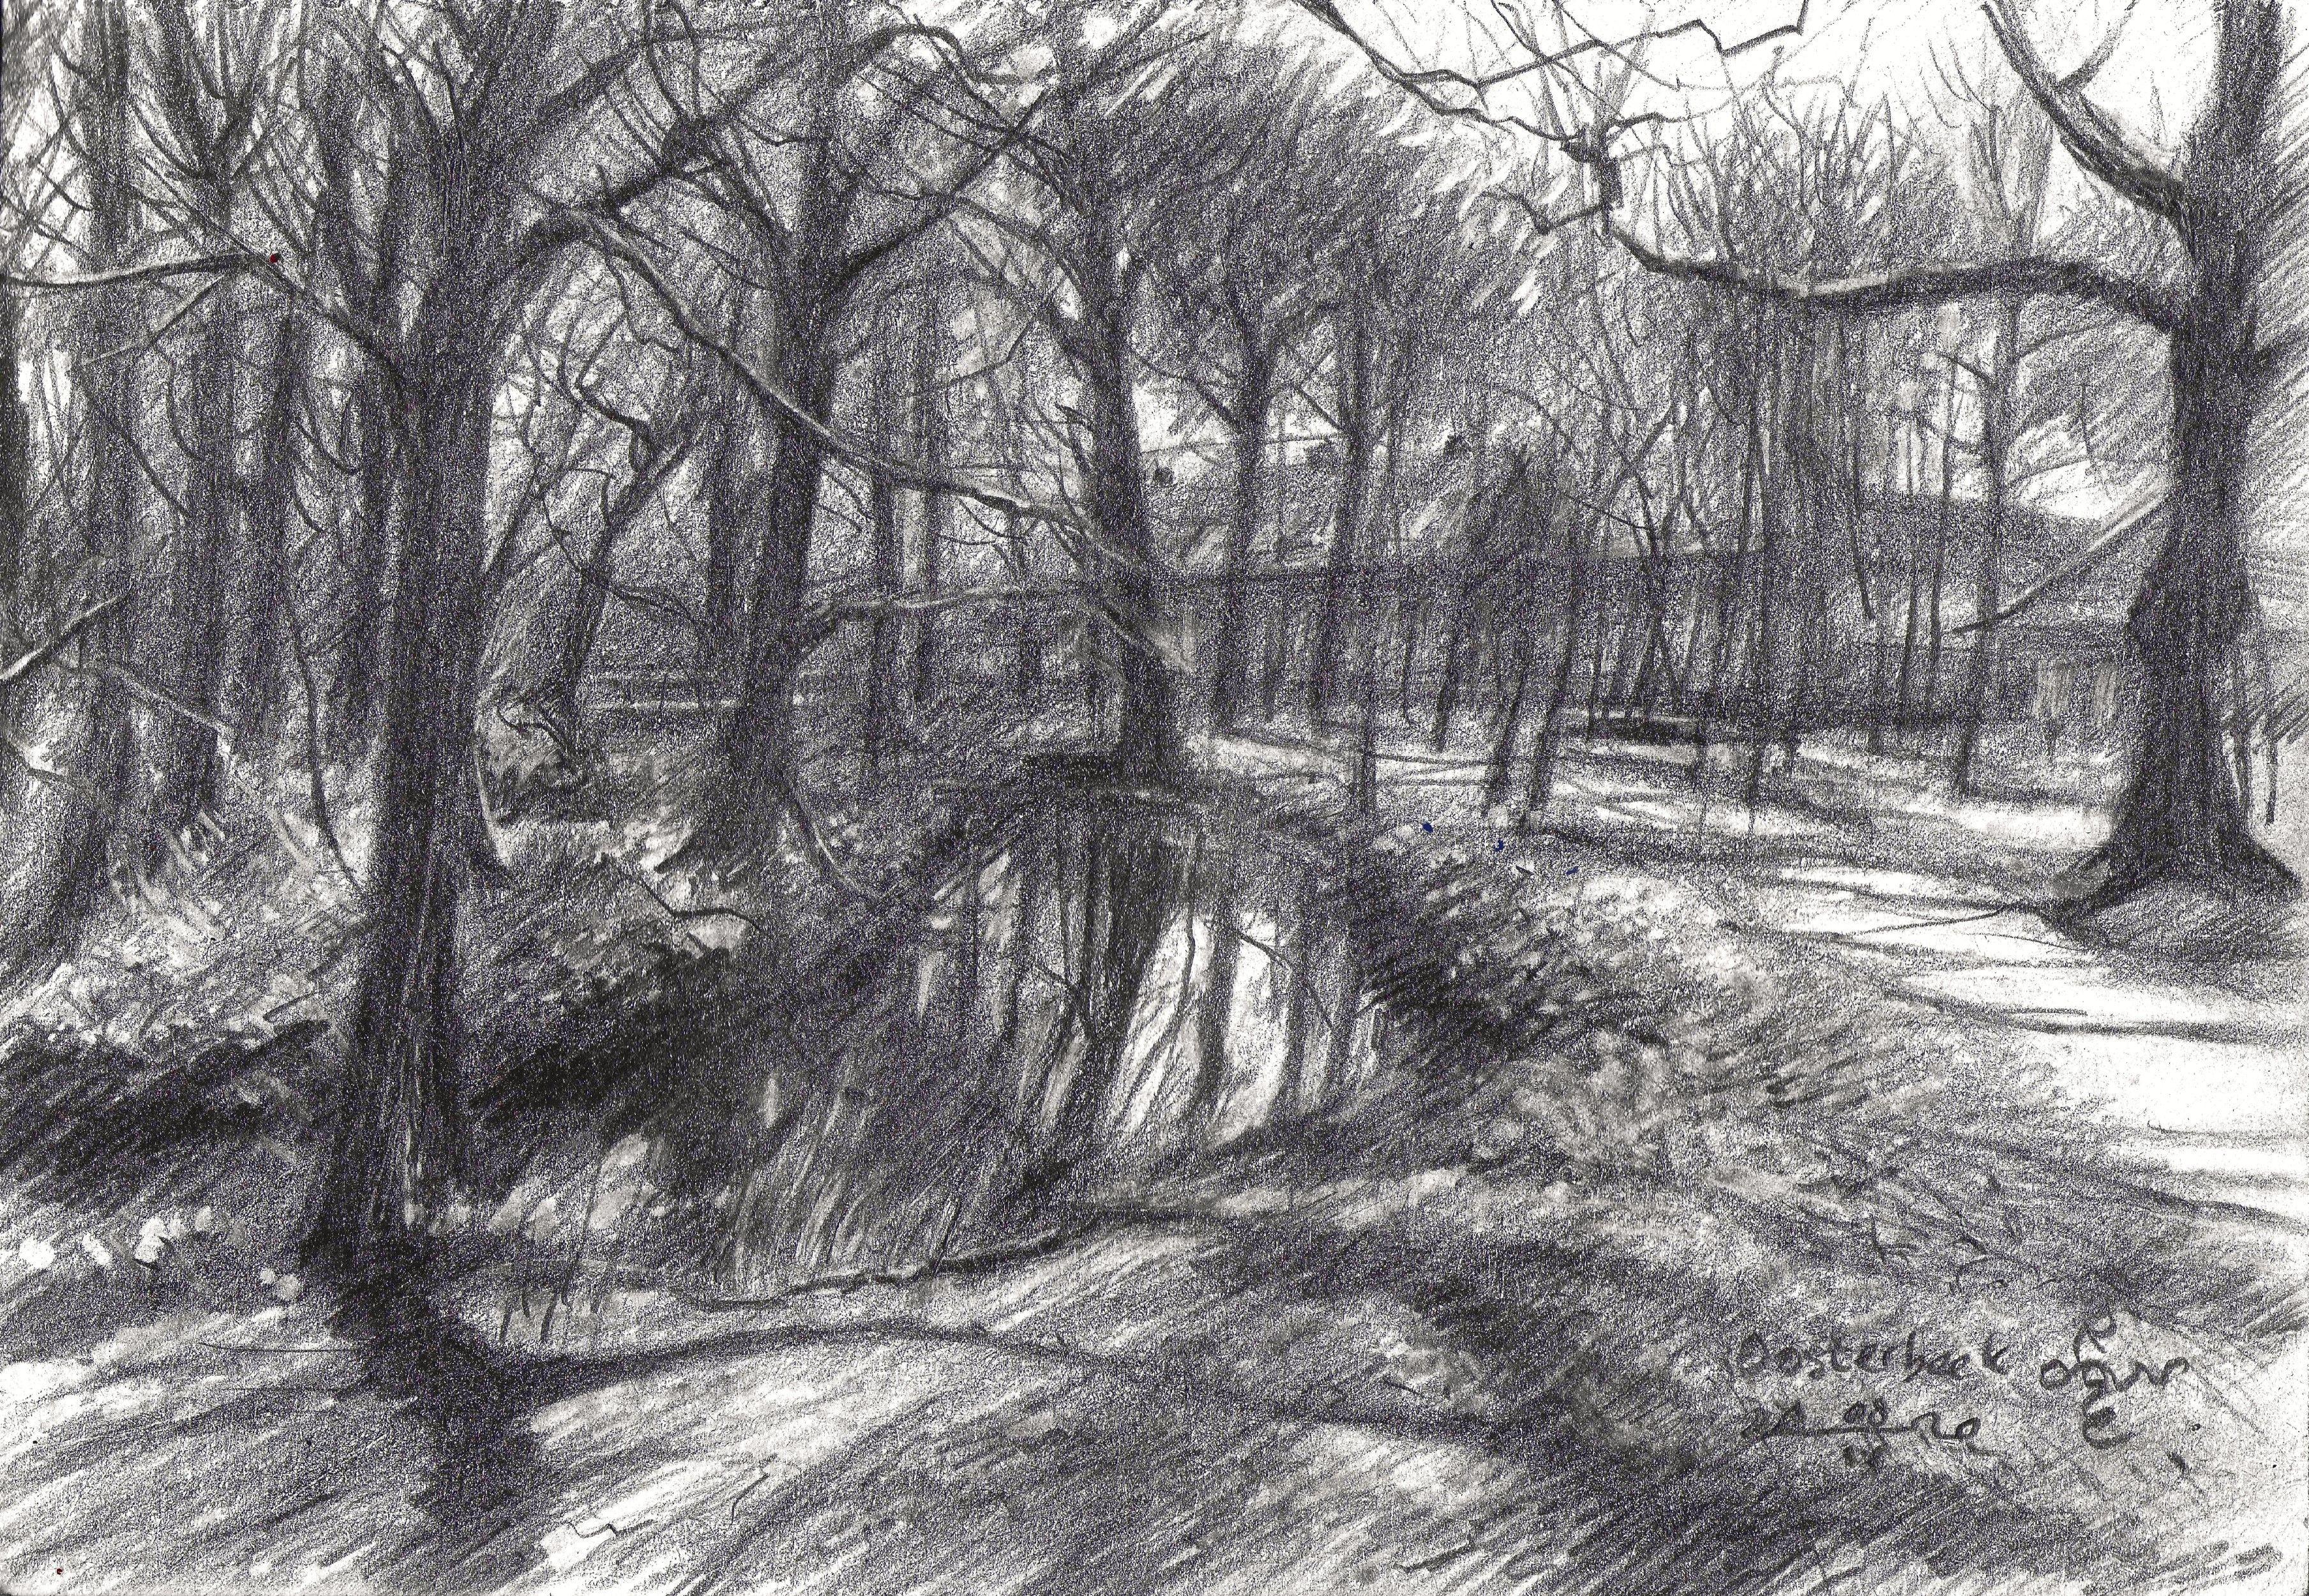 Oosterbeek â€“ 07-04-20, Drawing, Pencil/Colored Pencil on Paper - Art by Corne Akkers